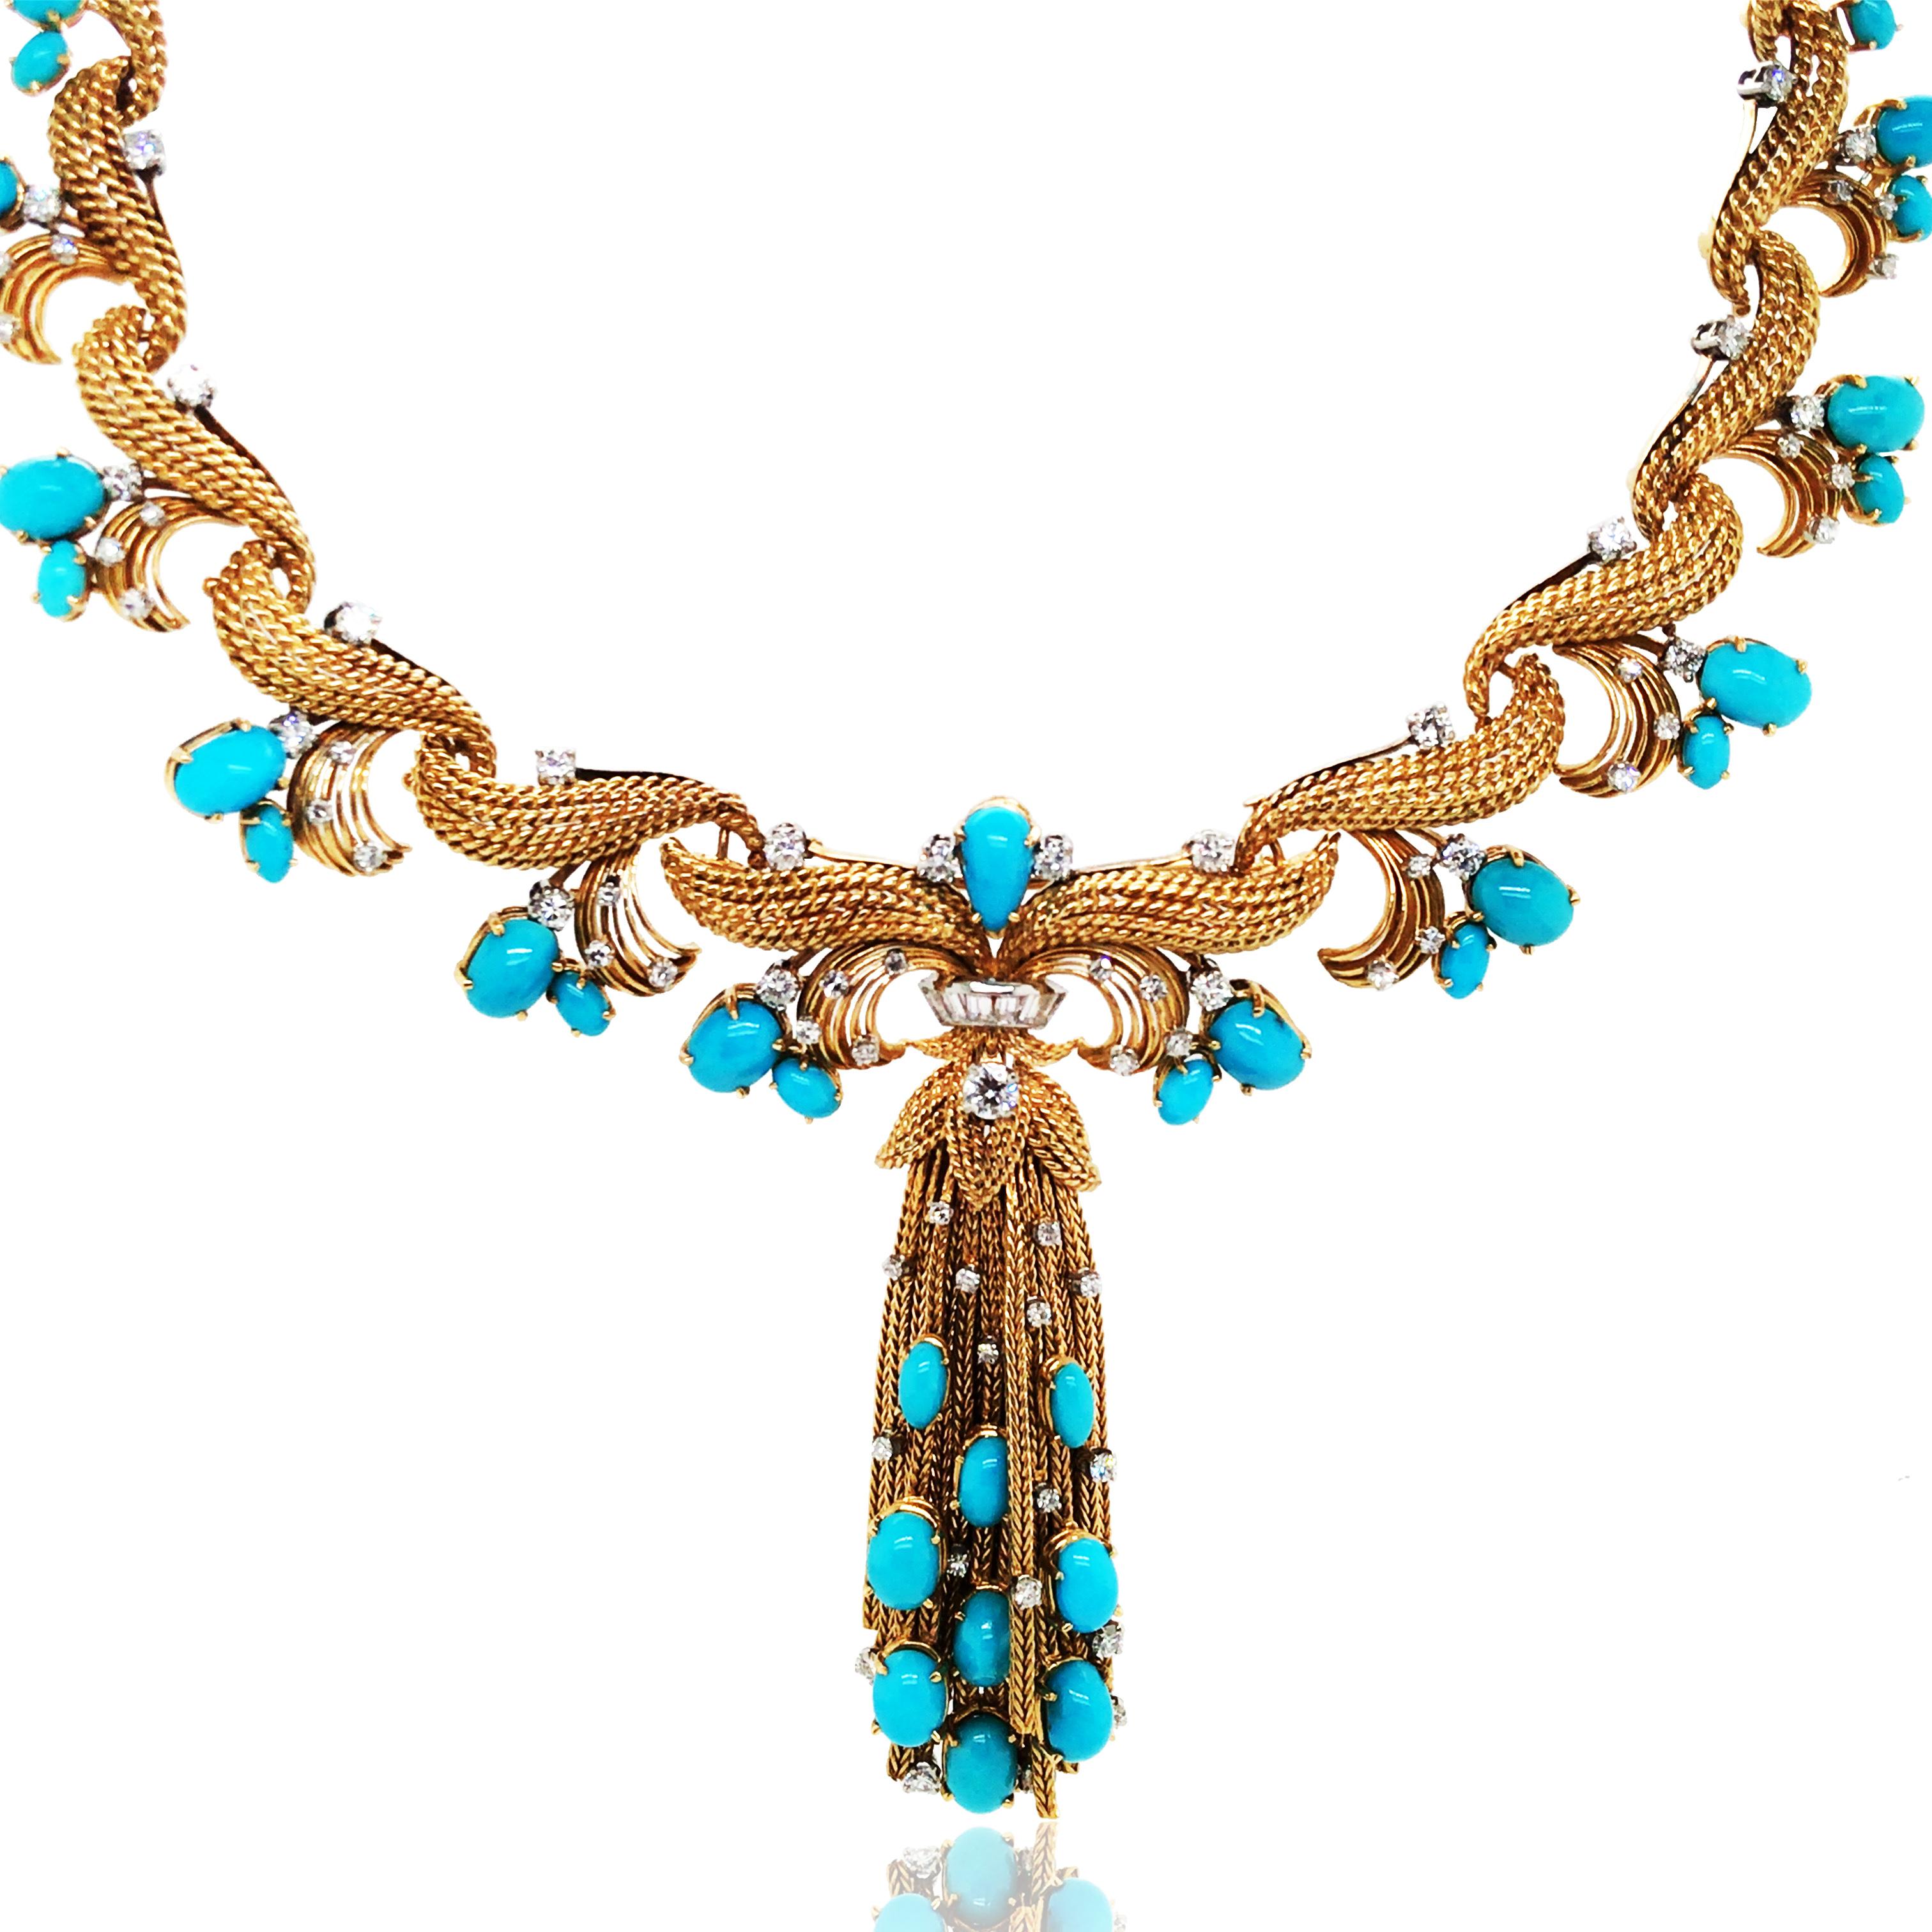 18K gold necklace with a removable center section allowing it to be worn as a brooch, containing 41 round, oval and pear shaped turquoise cabochons, 82 round brilliant and single cut and five baguette cut diamonds total approx. 2.0ct.  

Weight: